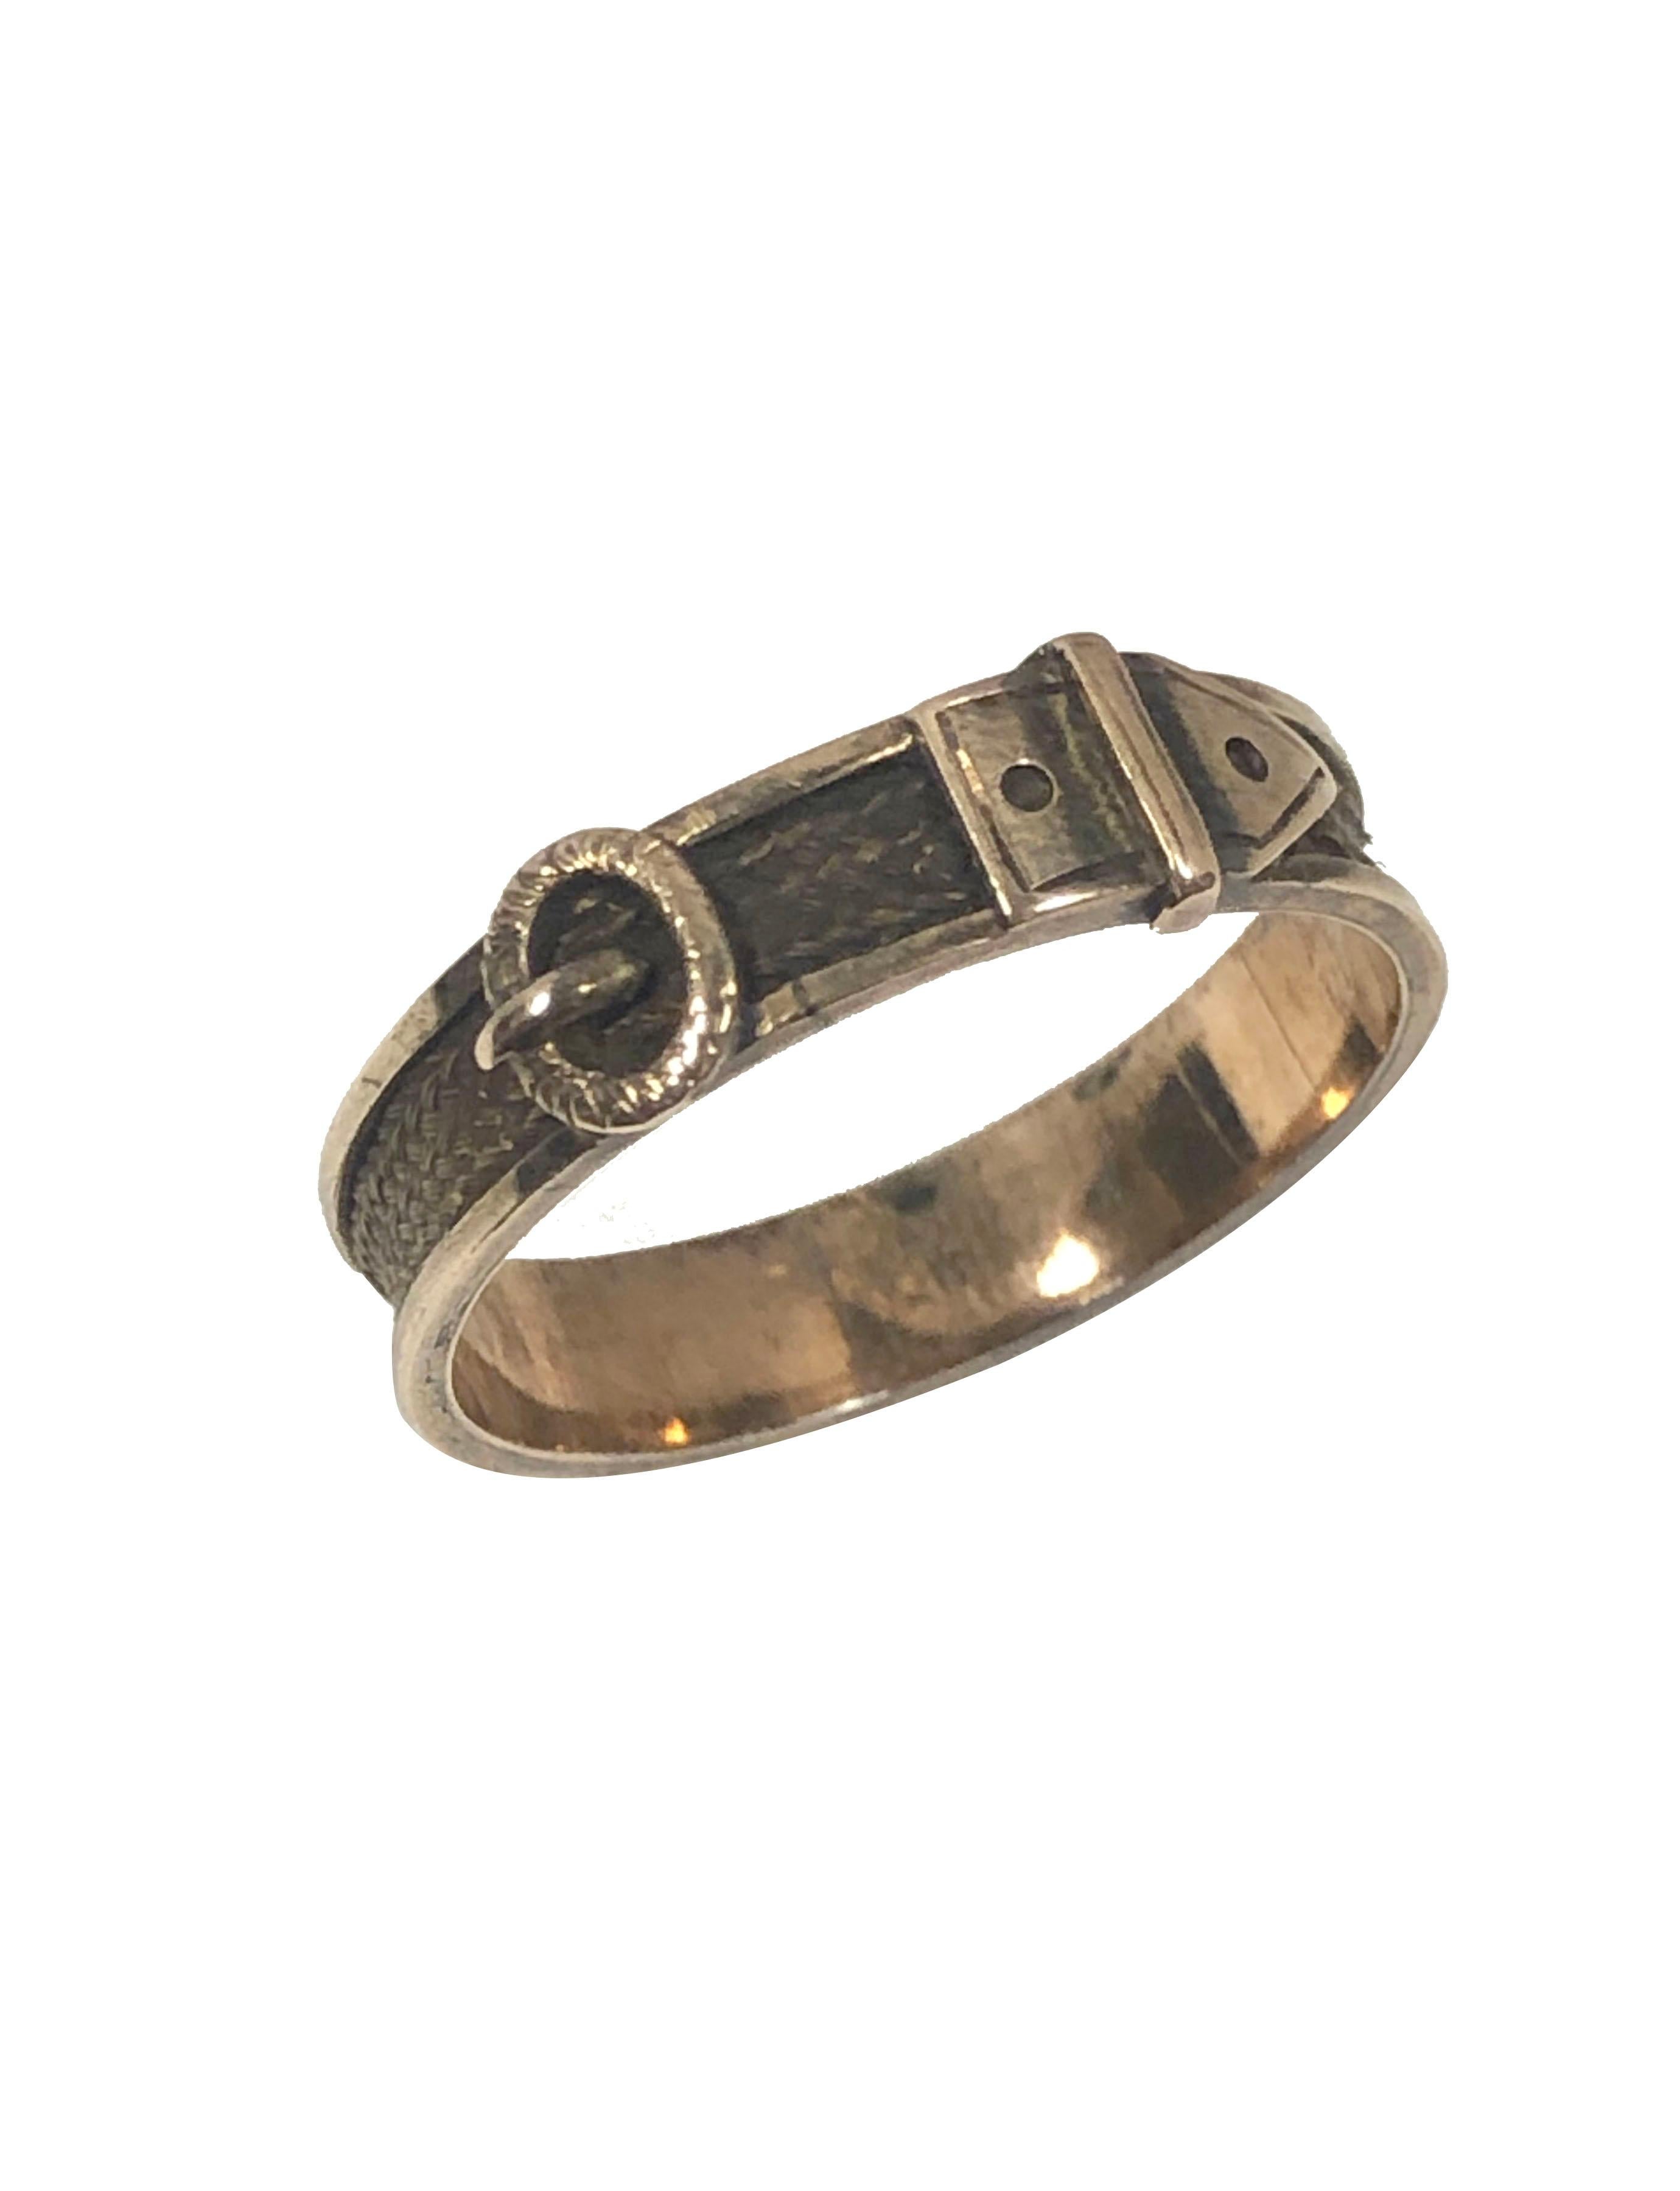 Mid Victorian Buckle Form Gold Mourning Memorial Ring In Excellent Condition For Sale In Chicago, IL